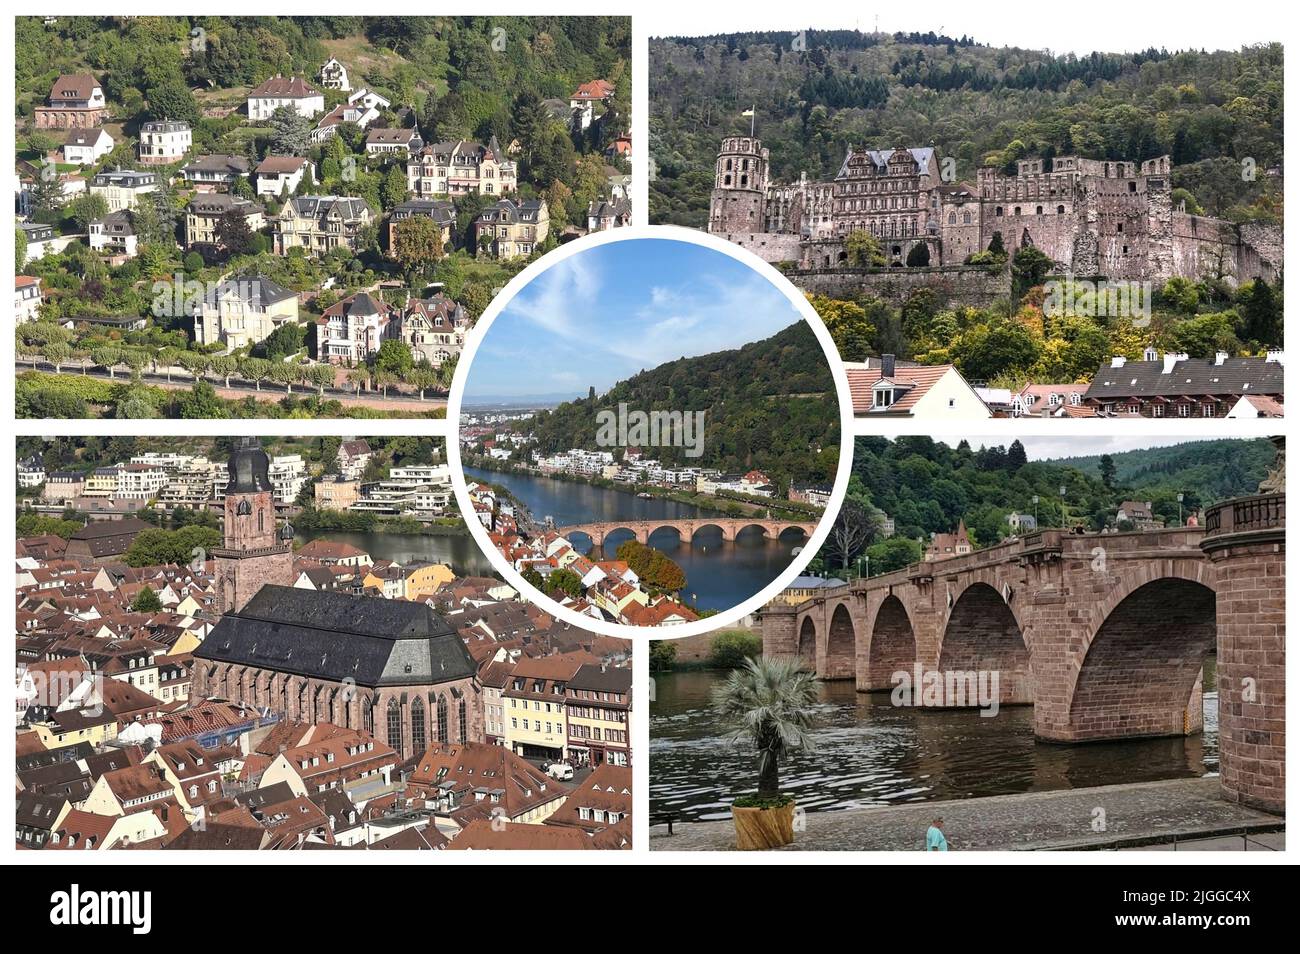 Heidelberg is a German city famous for its university and its many historical monuments. Stock Photo